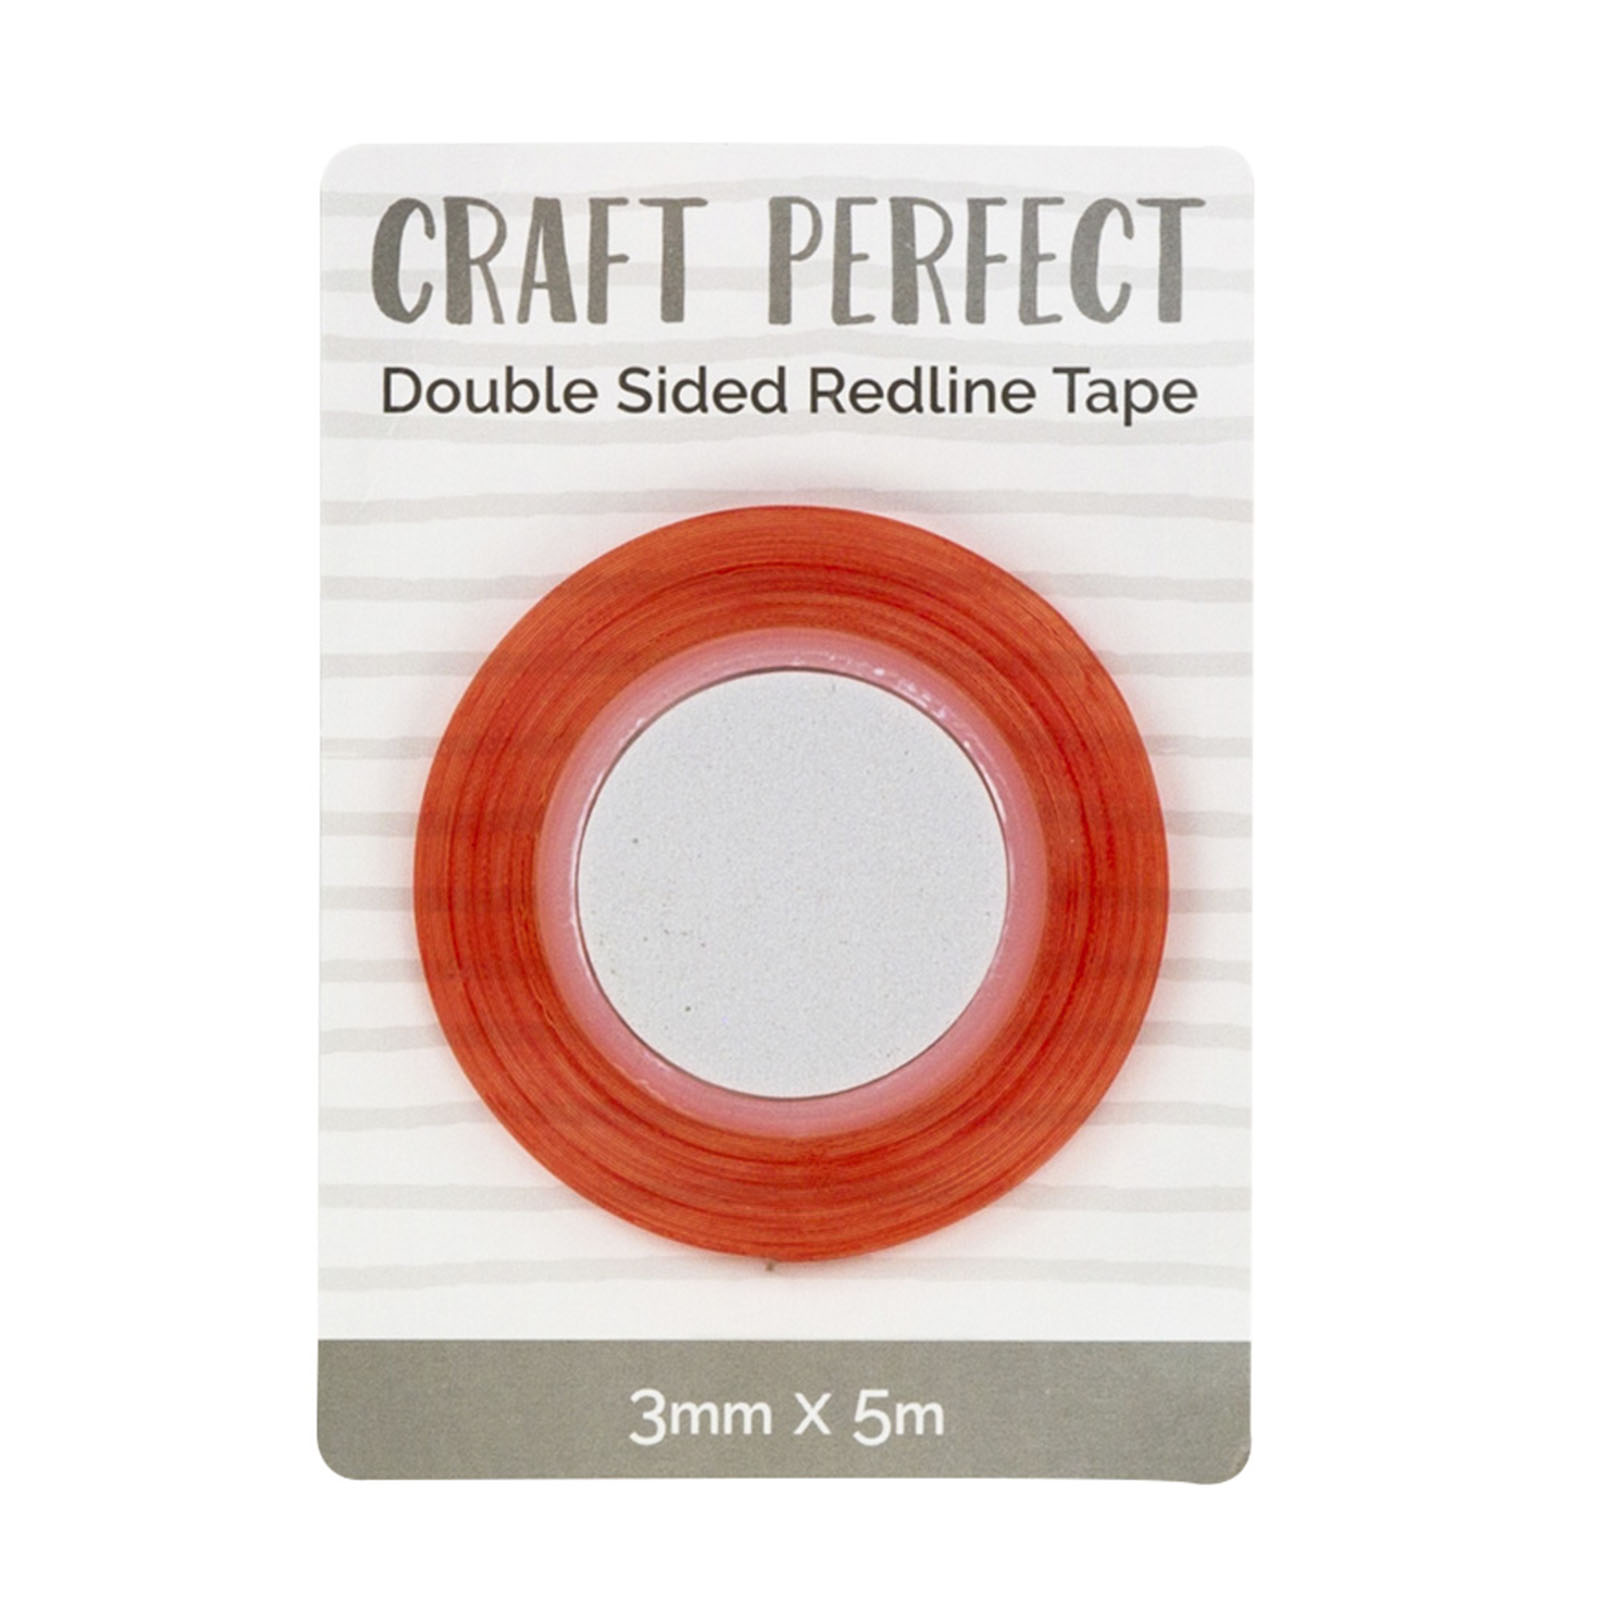 Craft Perfect • Double sided redline tape 3mm